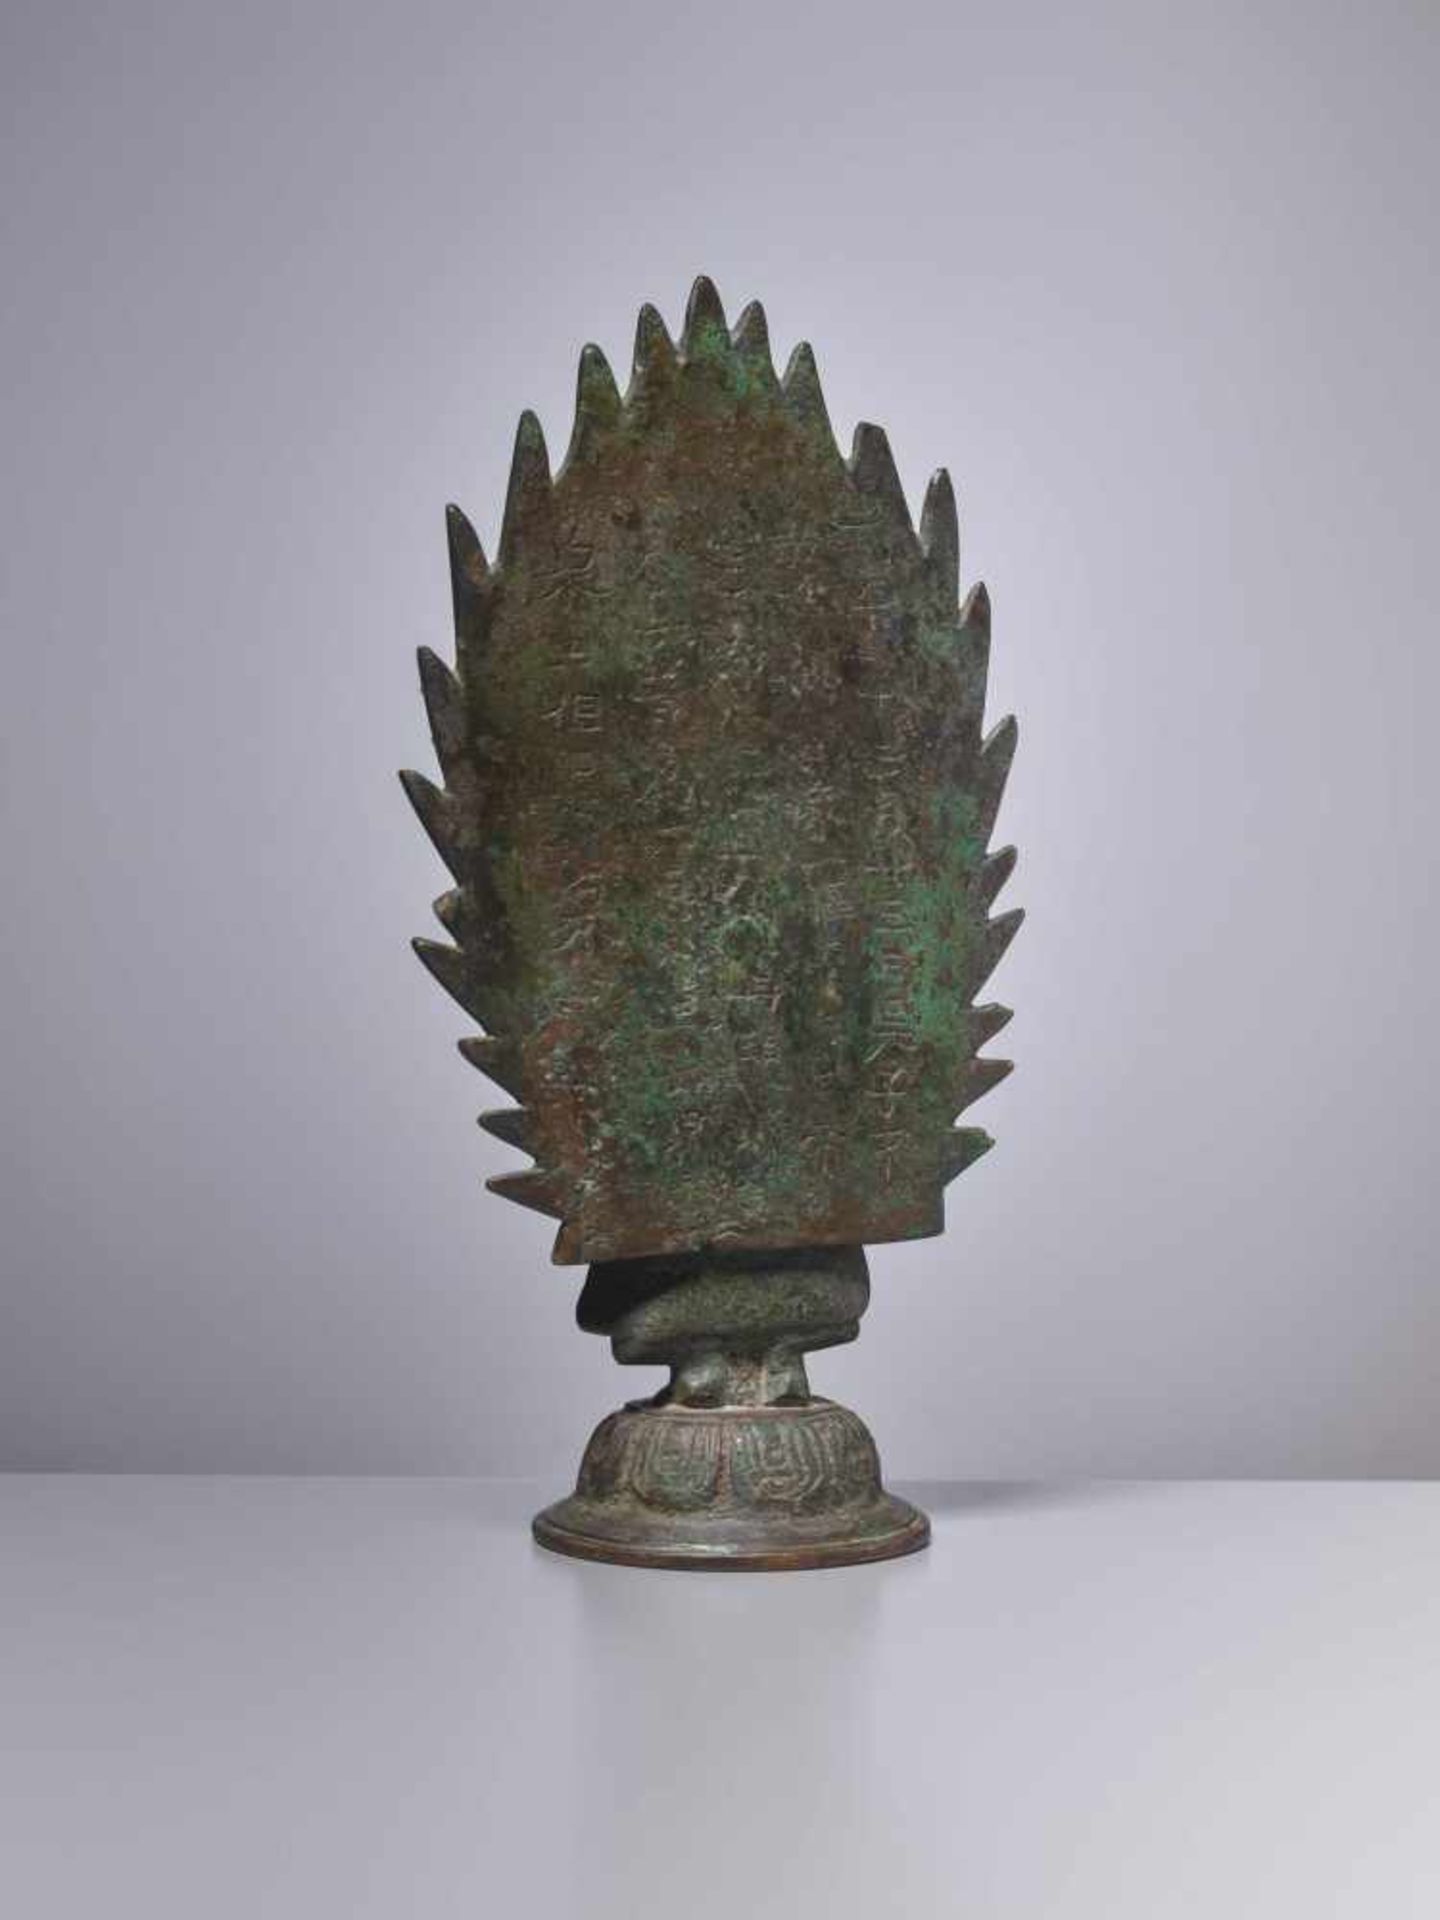 A BRONZE BUDDHA STANDING IN FRONT OF A FLAMING HALO, DATED 571 Cast and incised bronze with a rich - Image 5 of 7